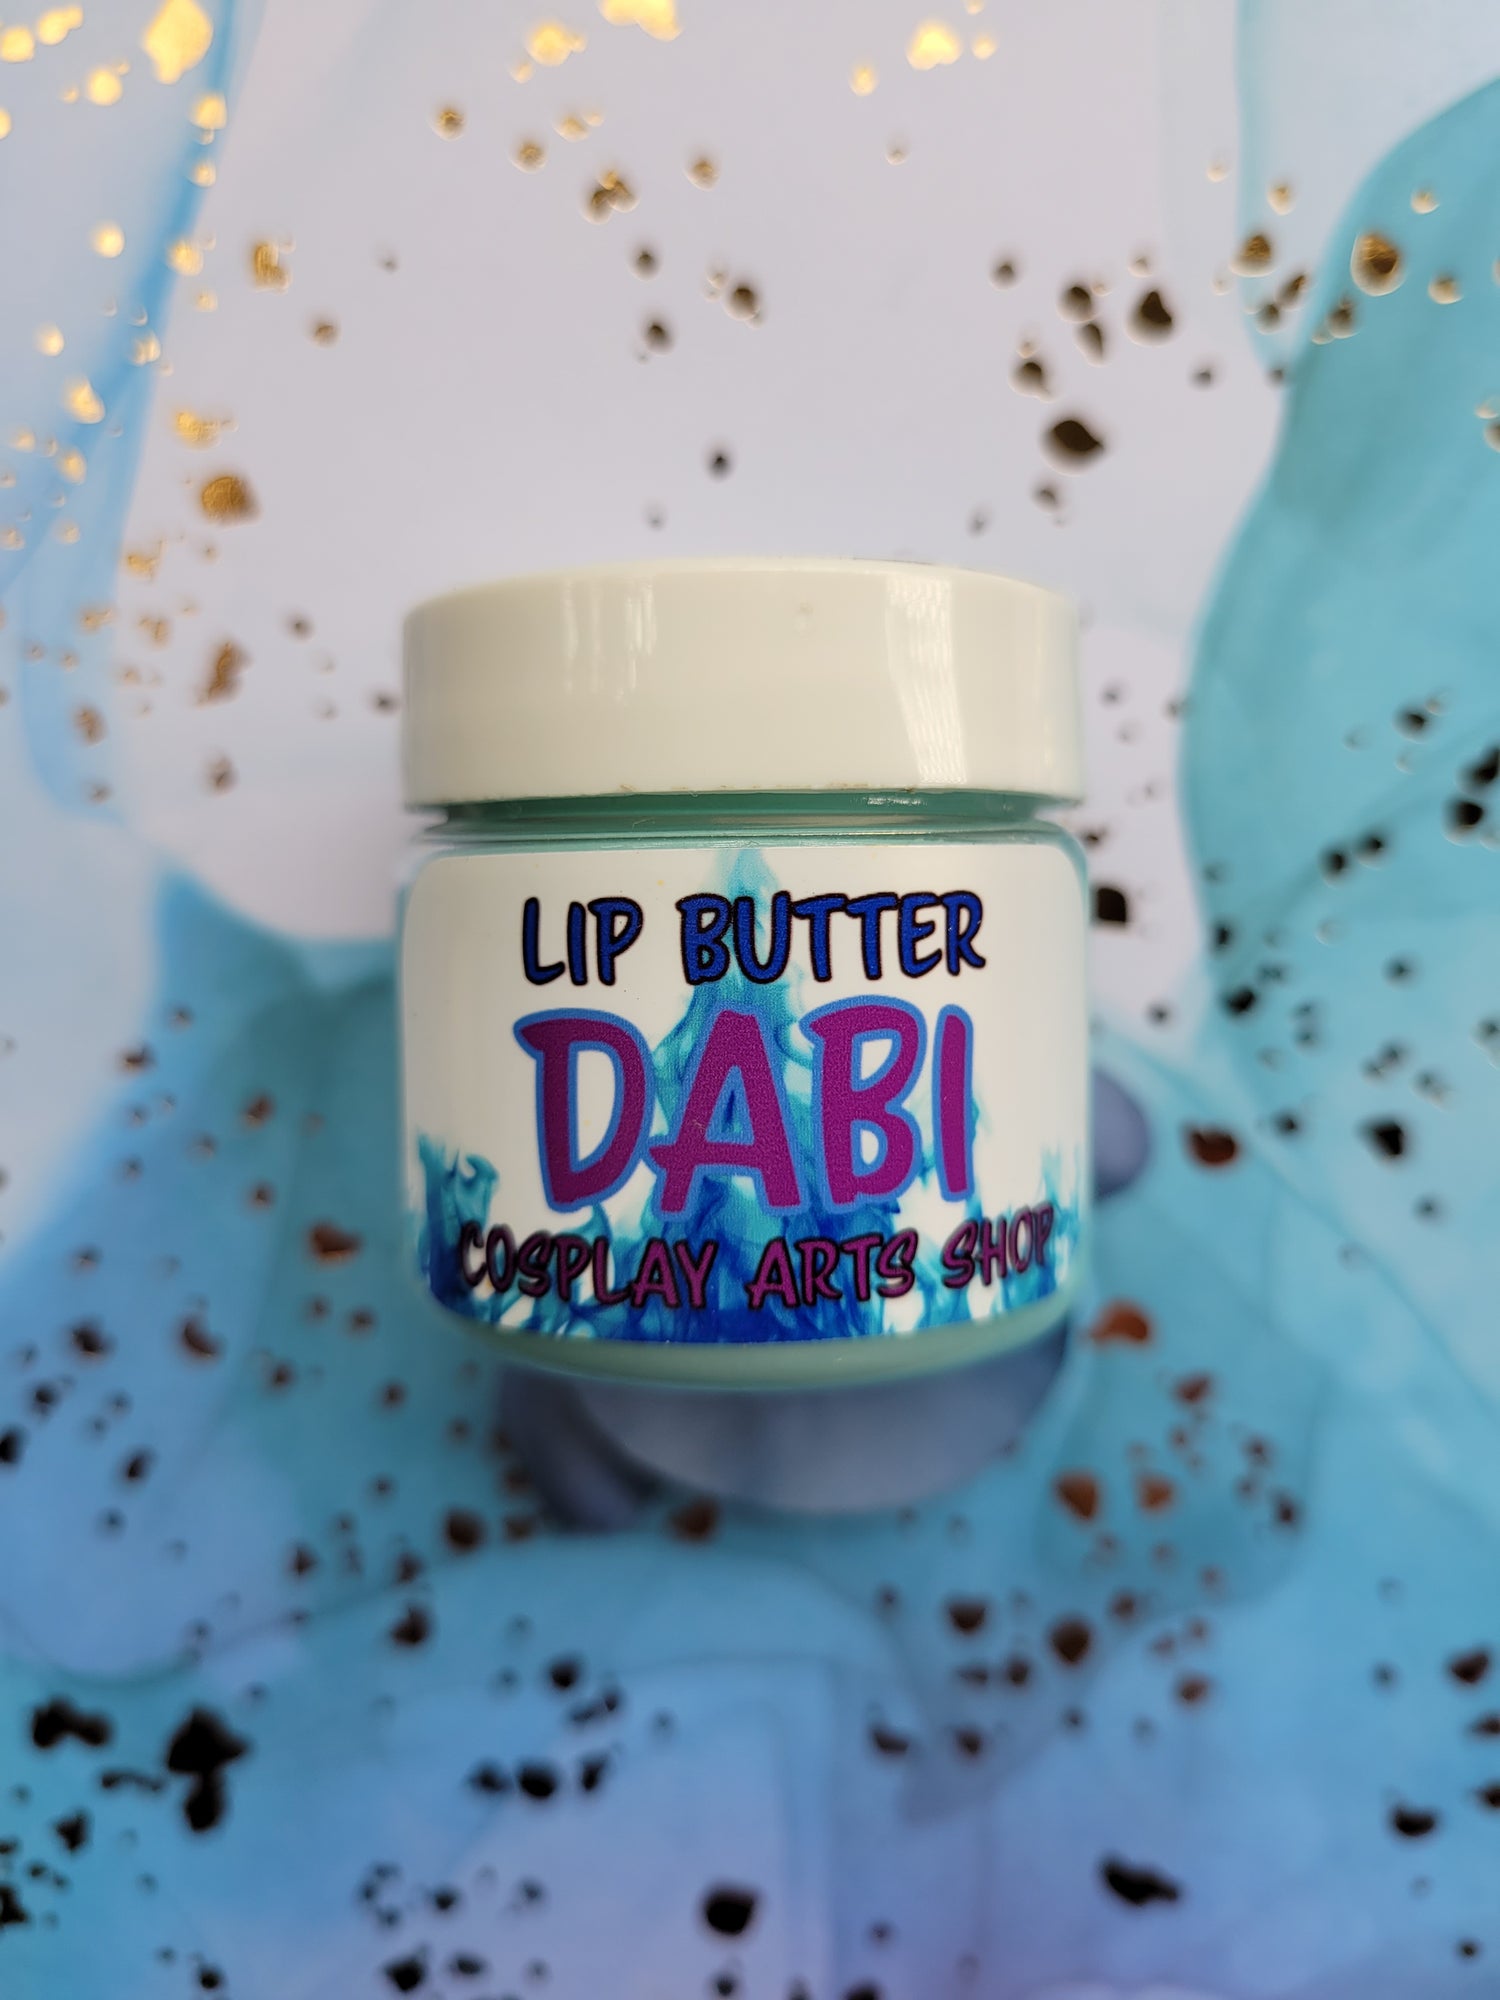 Anime Lip Butters - Cosplay Arts Shop